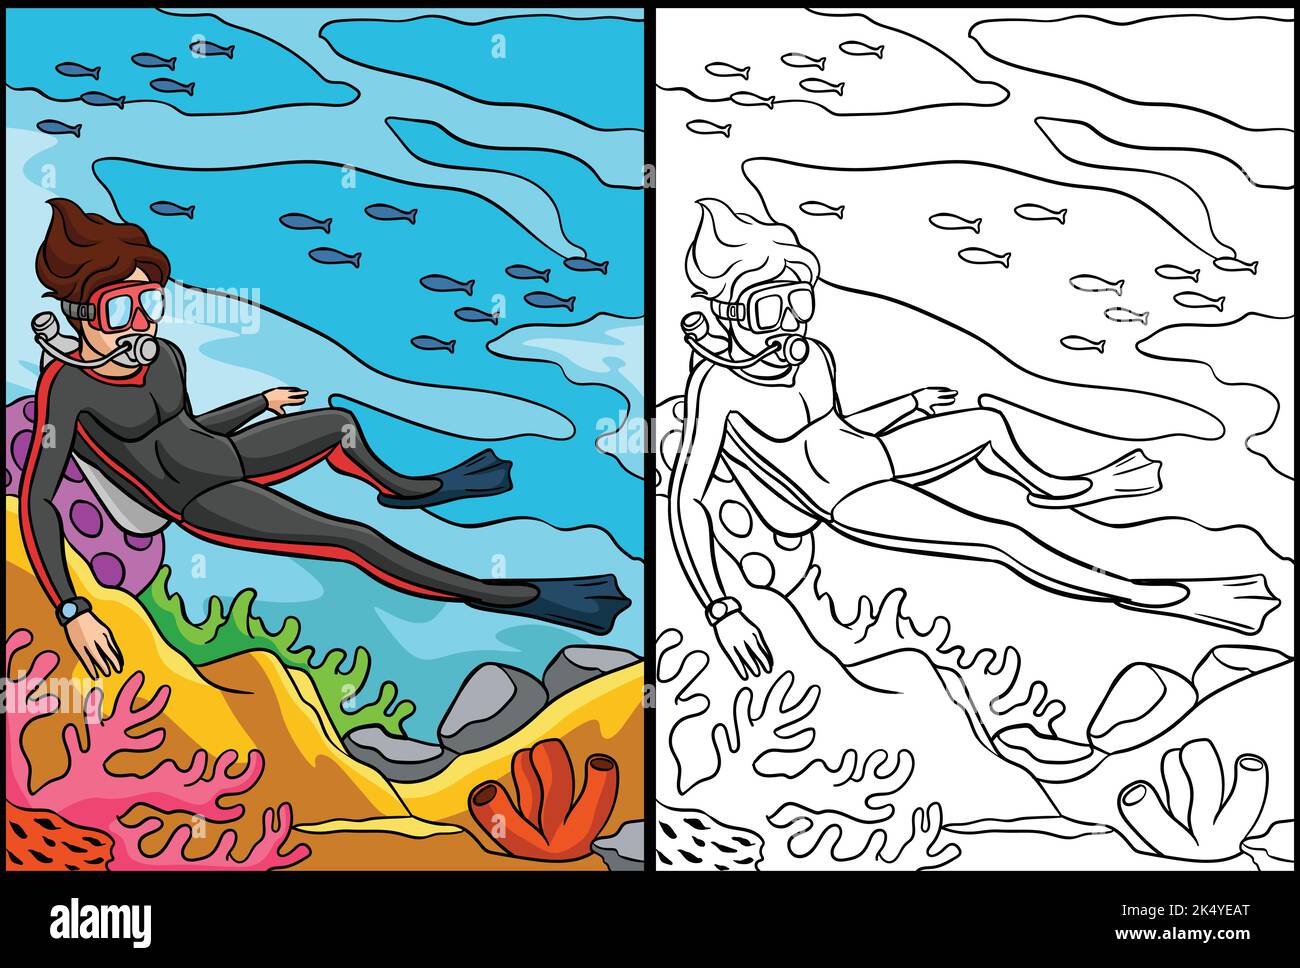 Scuba Diving Coloring Page Colored Illustration Stock Vector